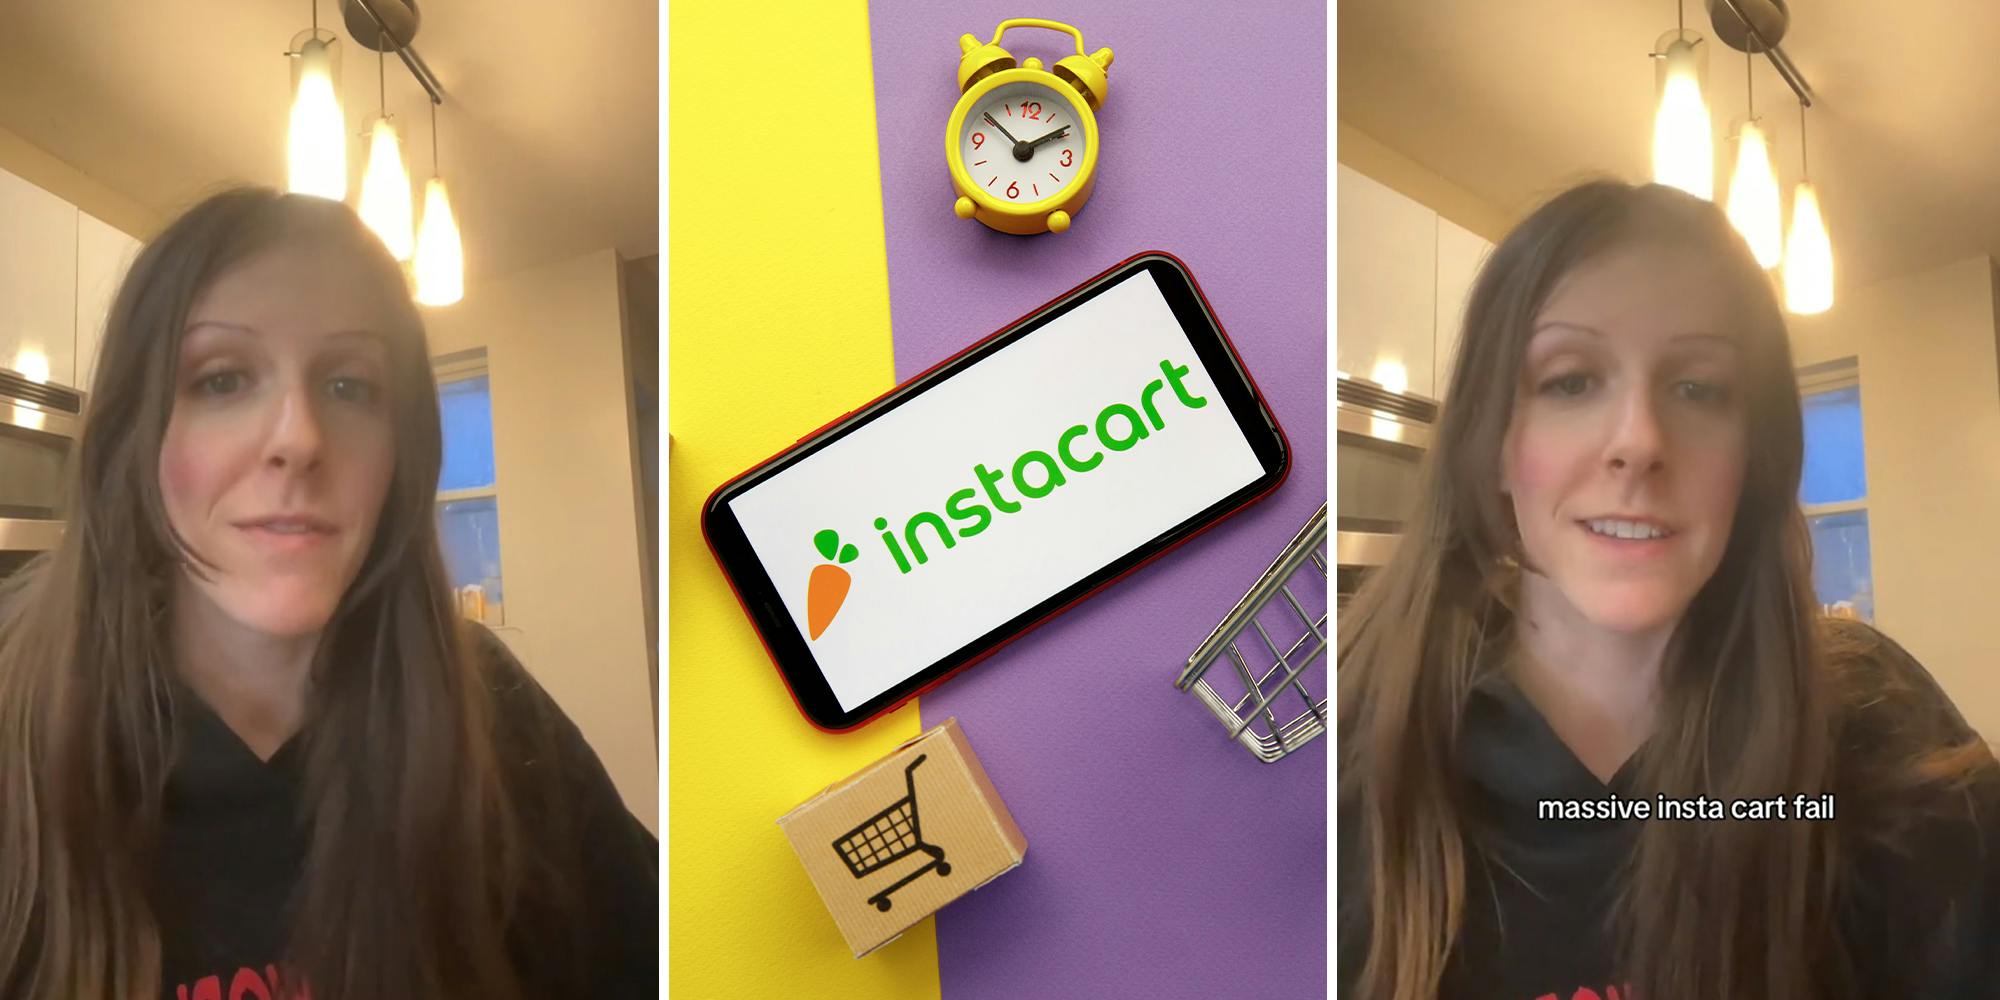 Male Instacart Shopper Replaces Lemons with Plastic Ones in Delivery